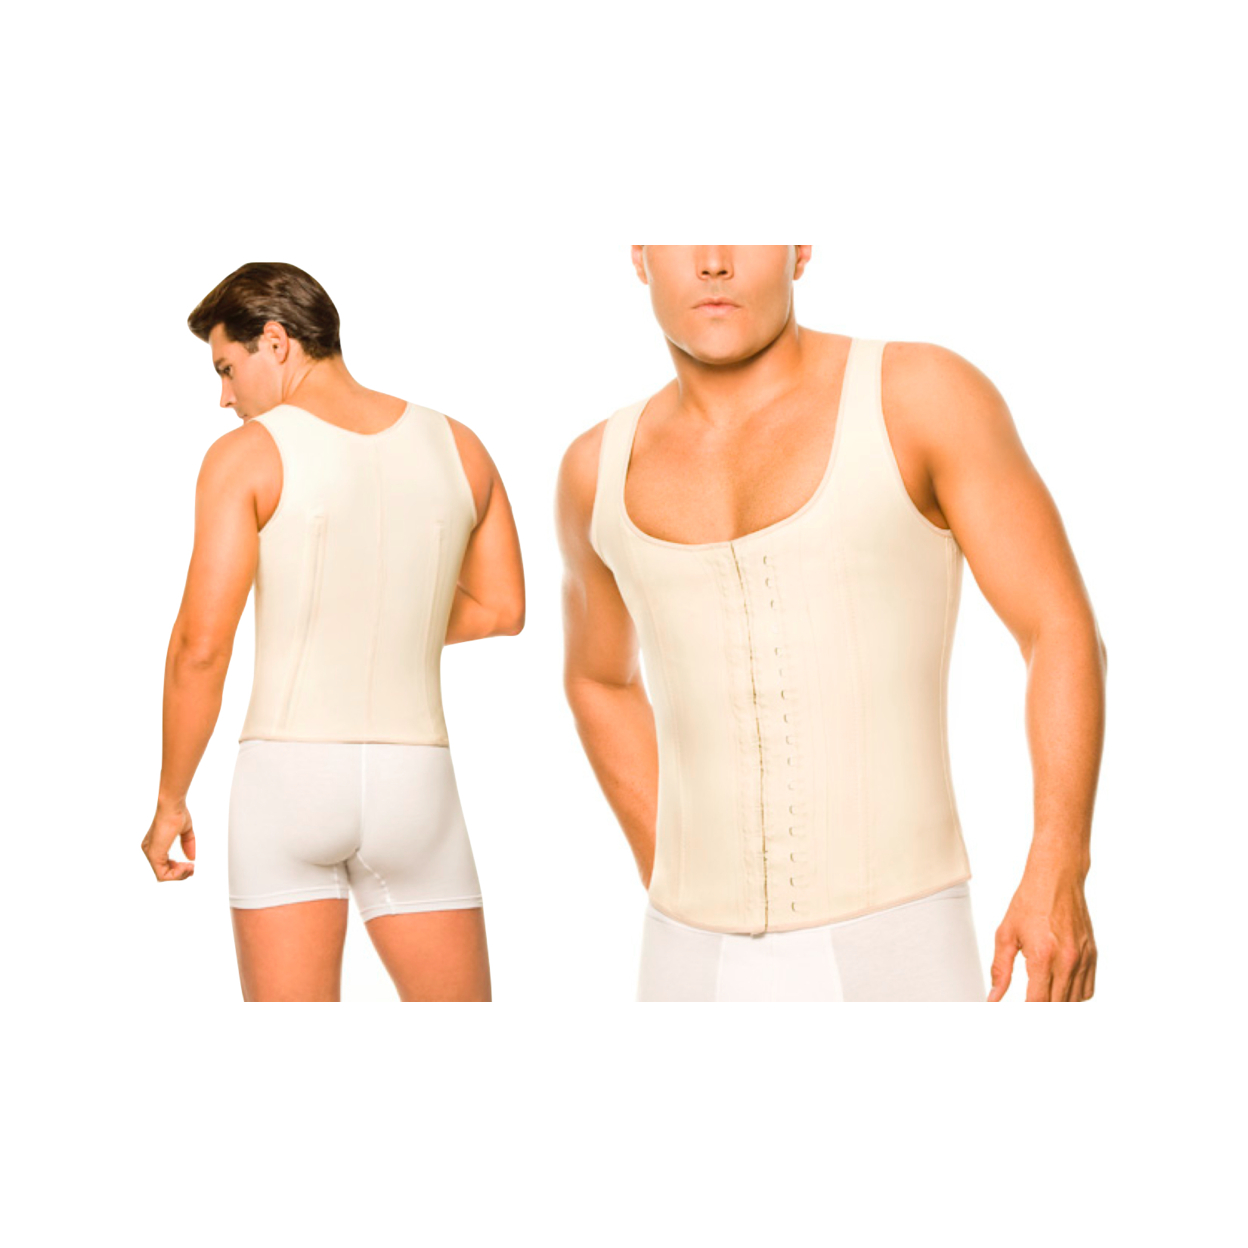 Men Waistcoat High-Compression Body Shaper In Regular And Plus Sizes - Nude, XS